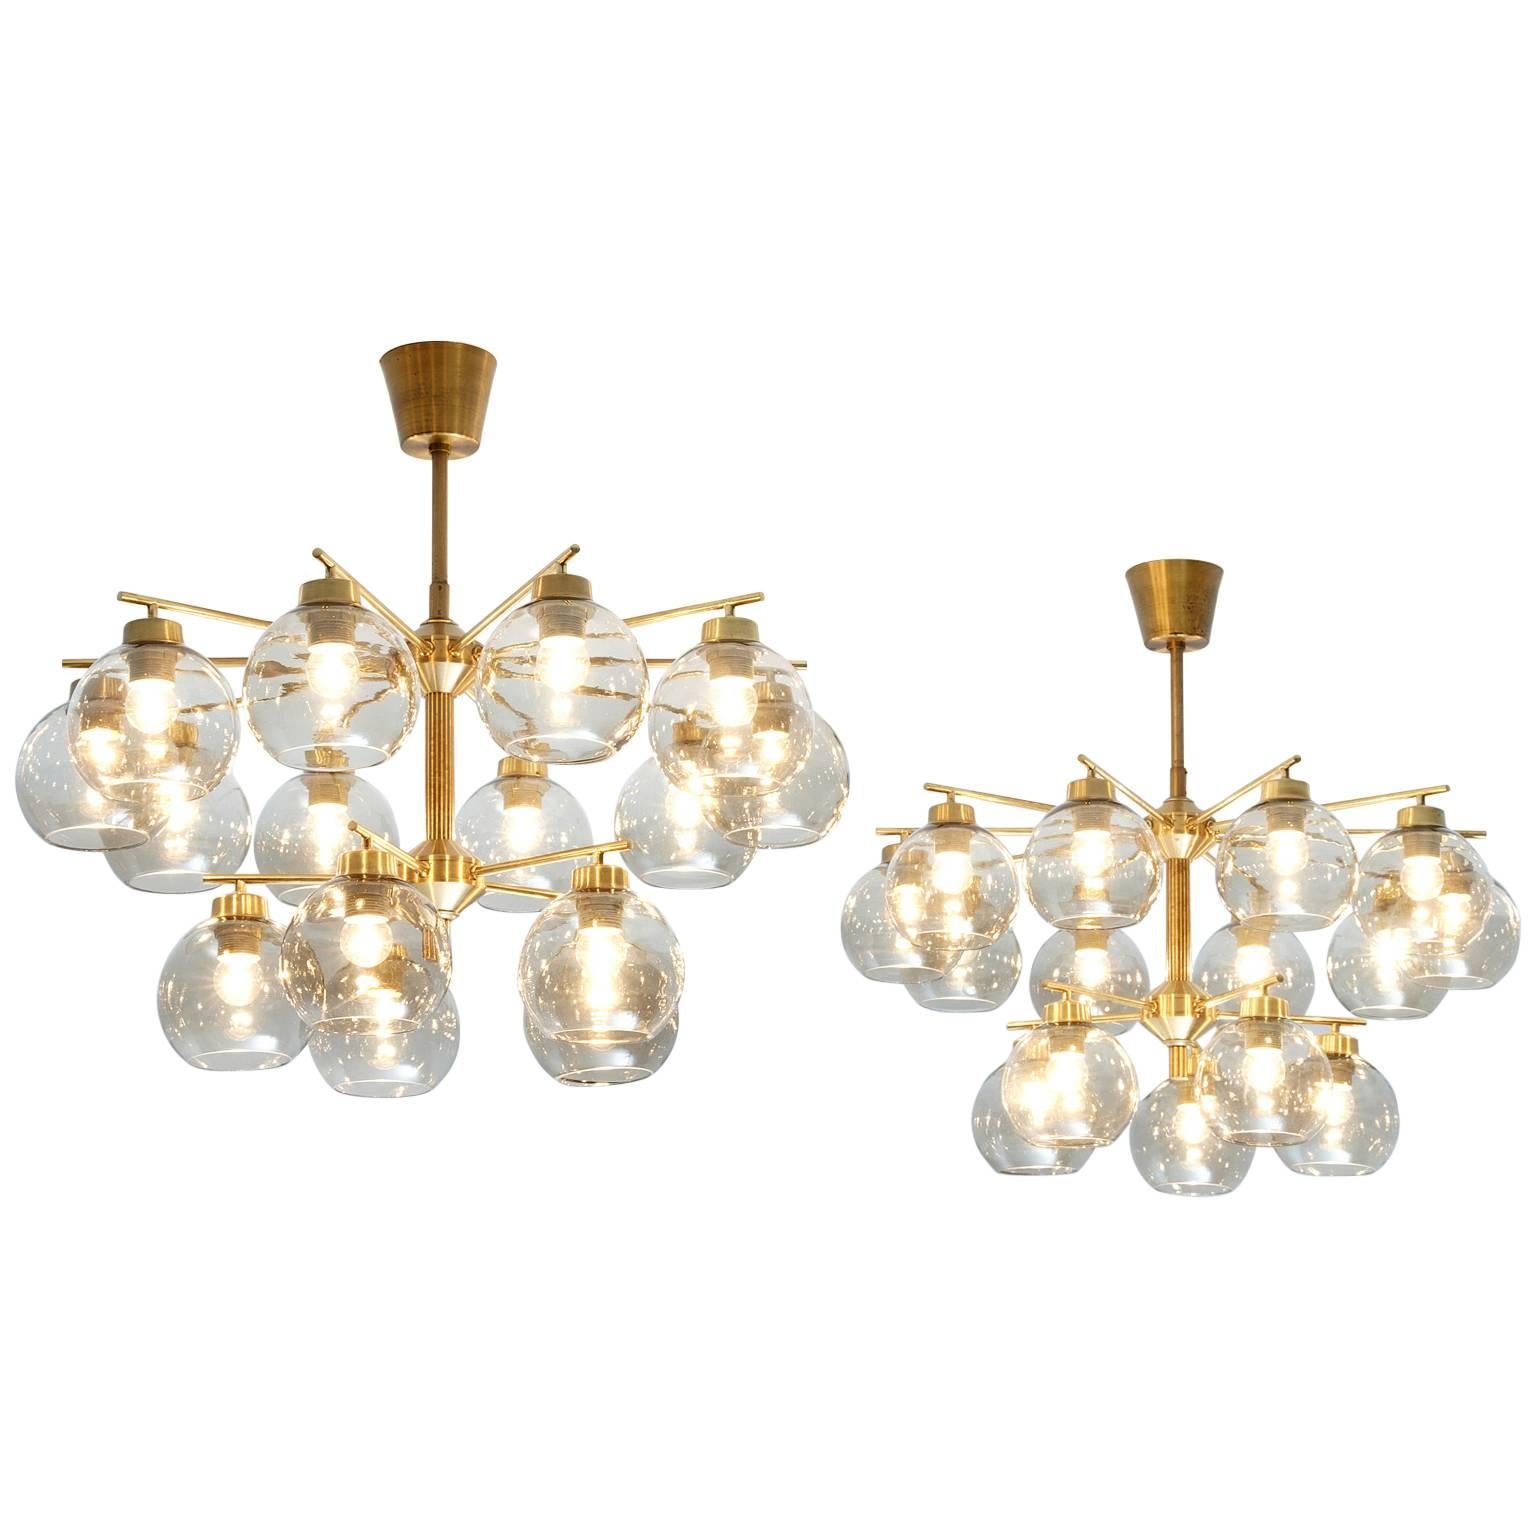 Hans-Agne Jakobsson Set of Two Chandeliers in Brass and Smoked Glass